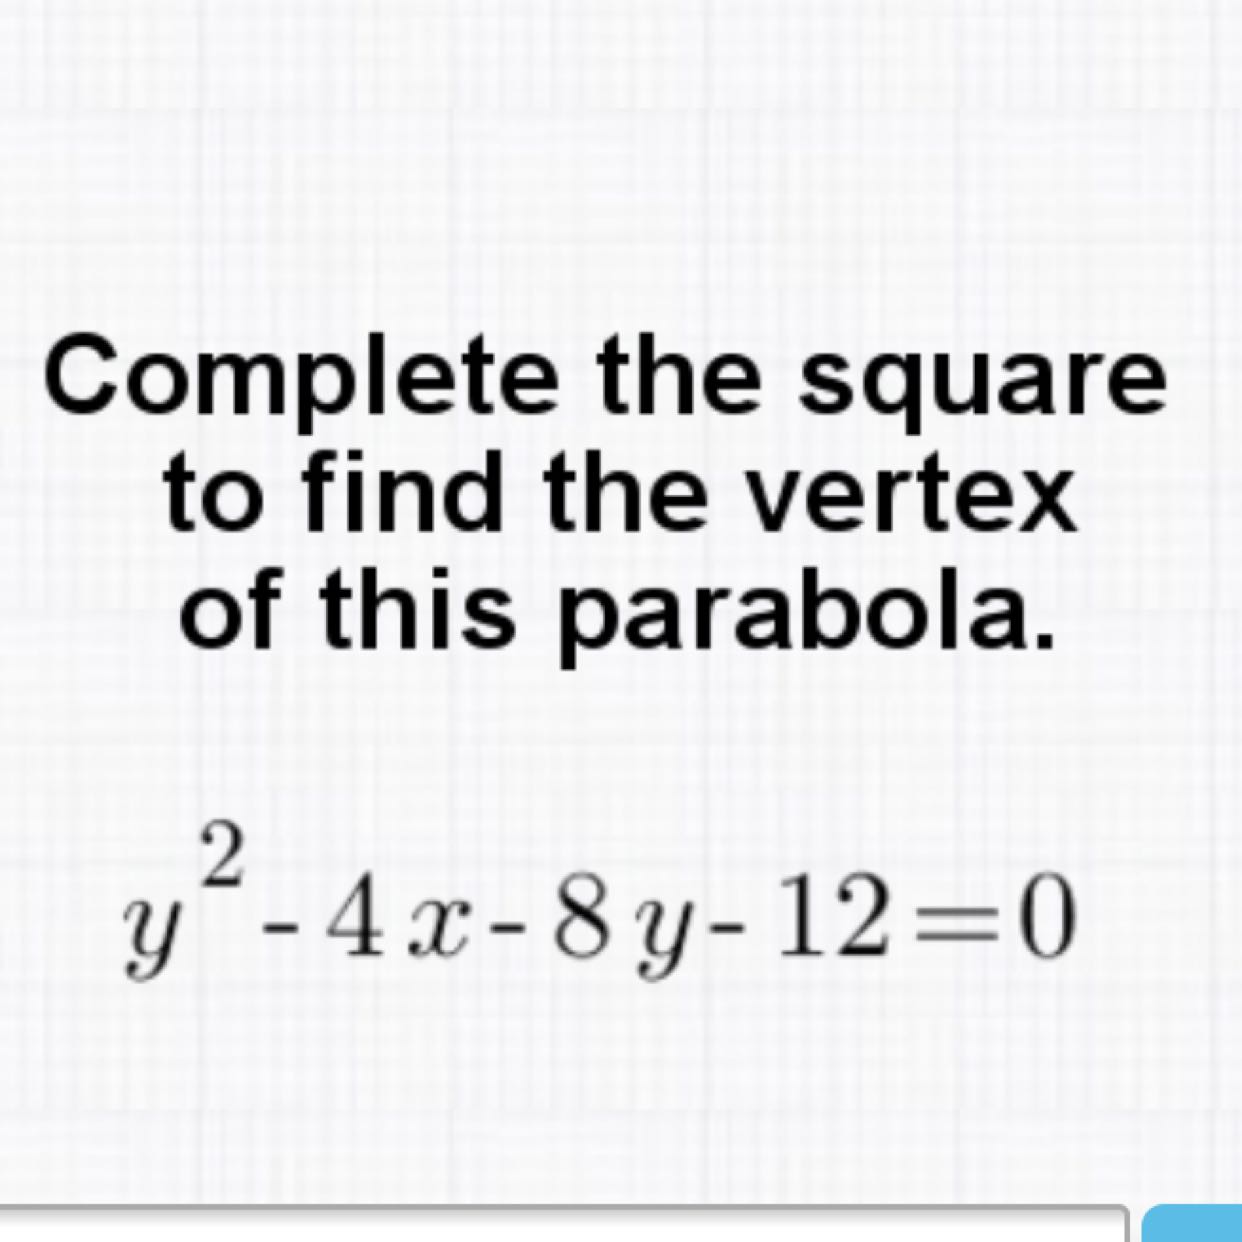 Complete the square to find the vertex of this parabola.
\[
y^{2}-4 x-8 y-12=0
\]